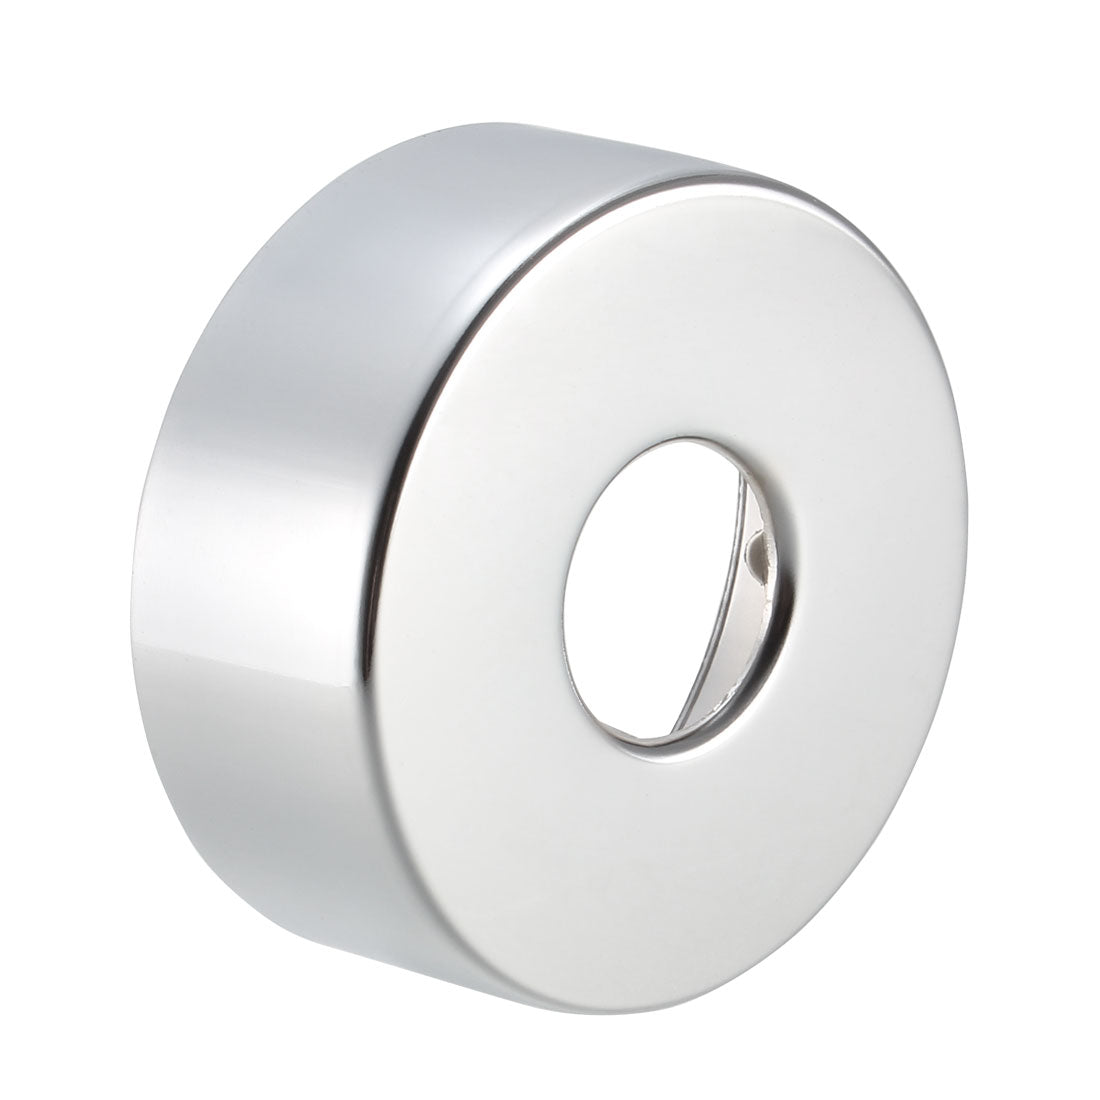 Uxcell Uxcell Round Escutcheon Plate 67x40mm Stainless Steel Polishing for 21mm Outer Diameter Pipe